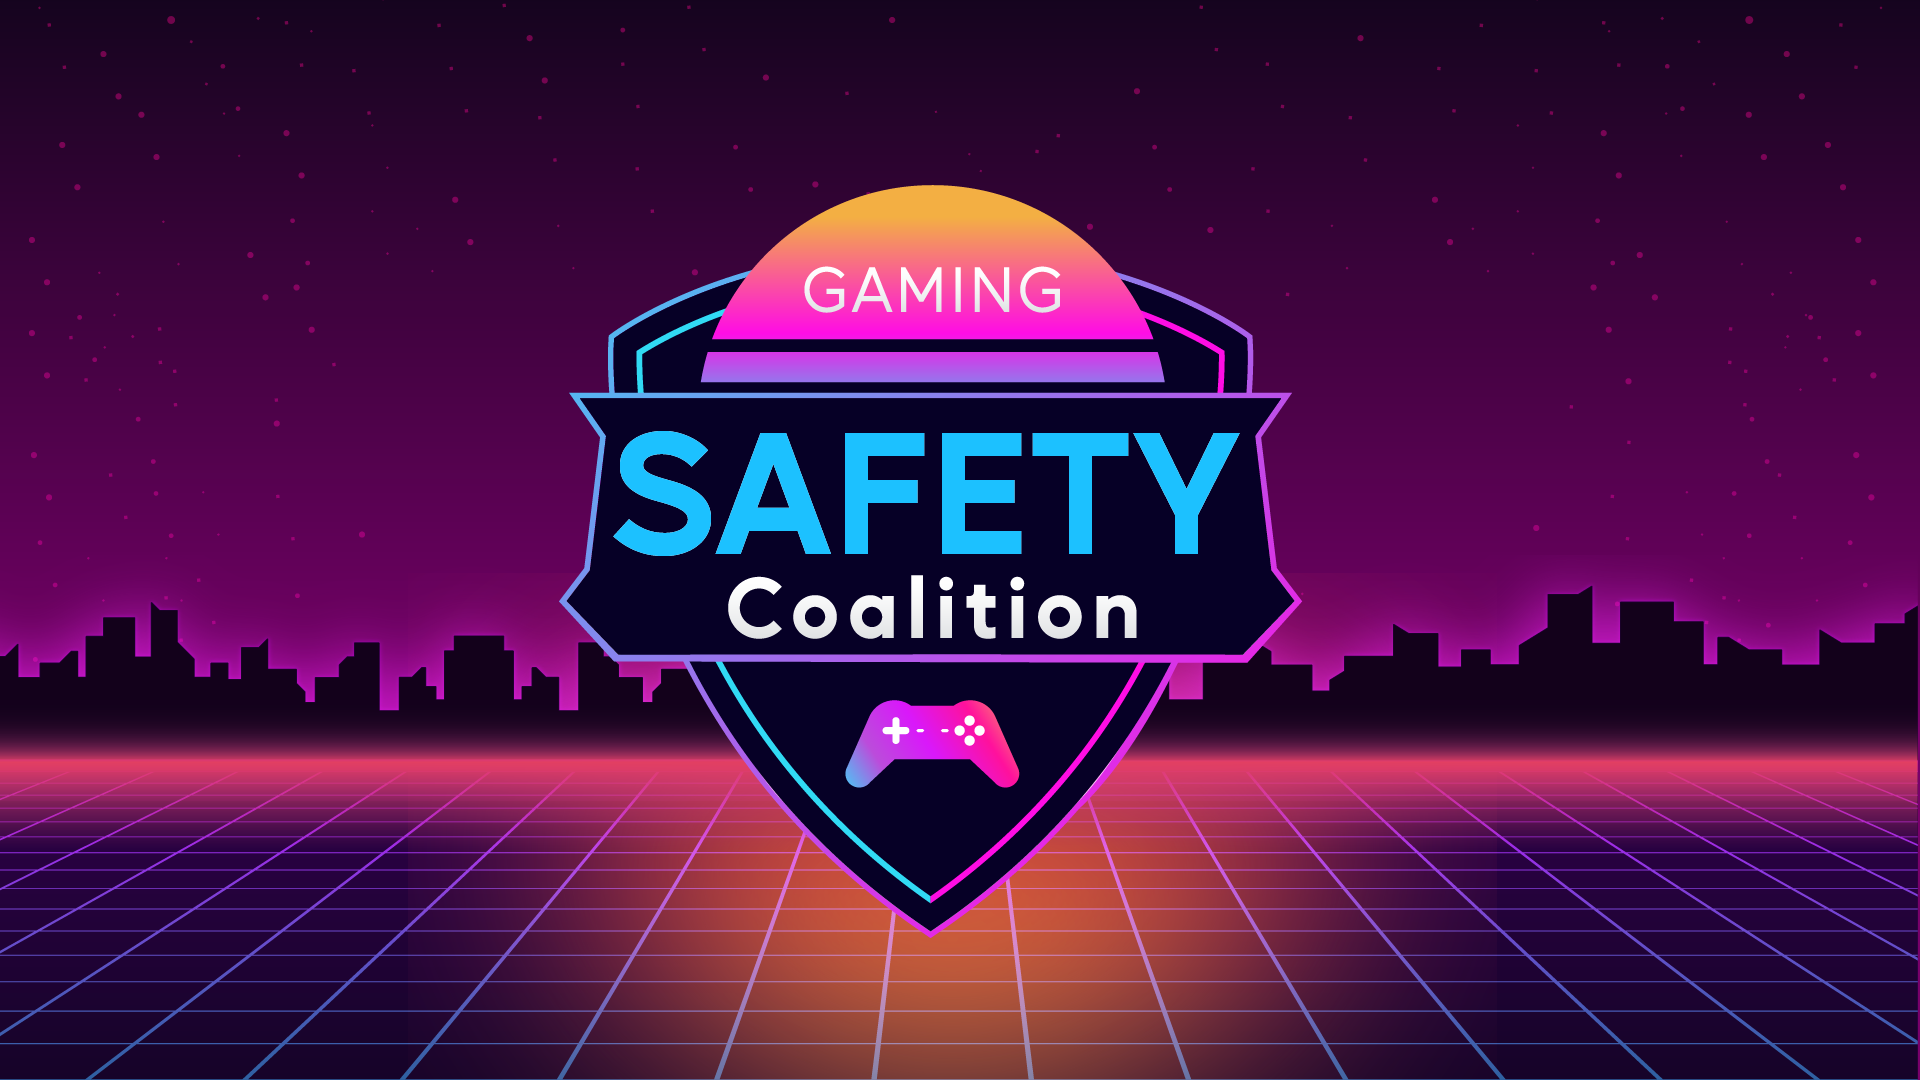 Banner for the Gaming Safety Coalition with a neon cityscape background. The text reads 'Gaming Safety Coalition' with a game controller icon at the bottom.